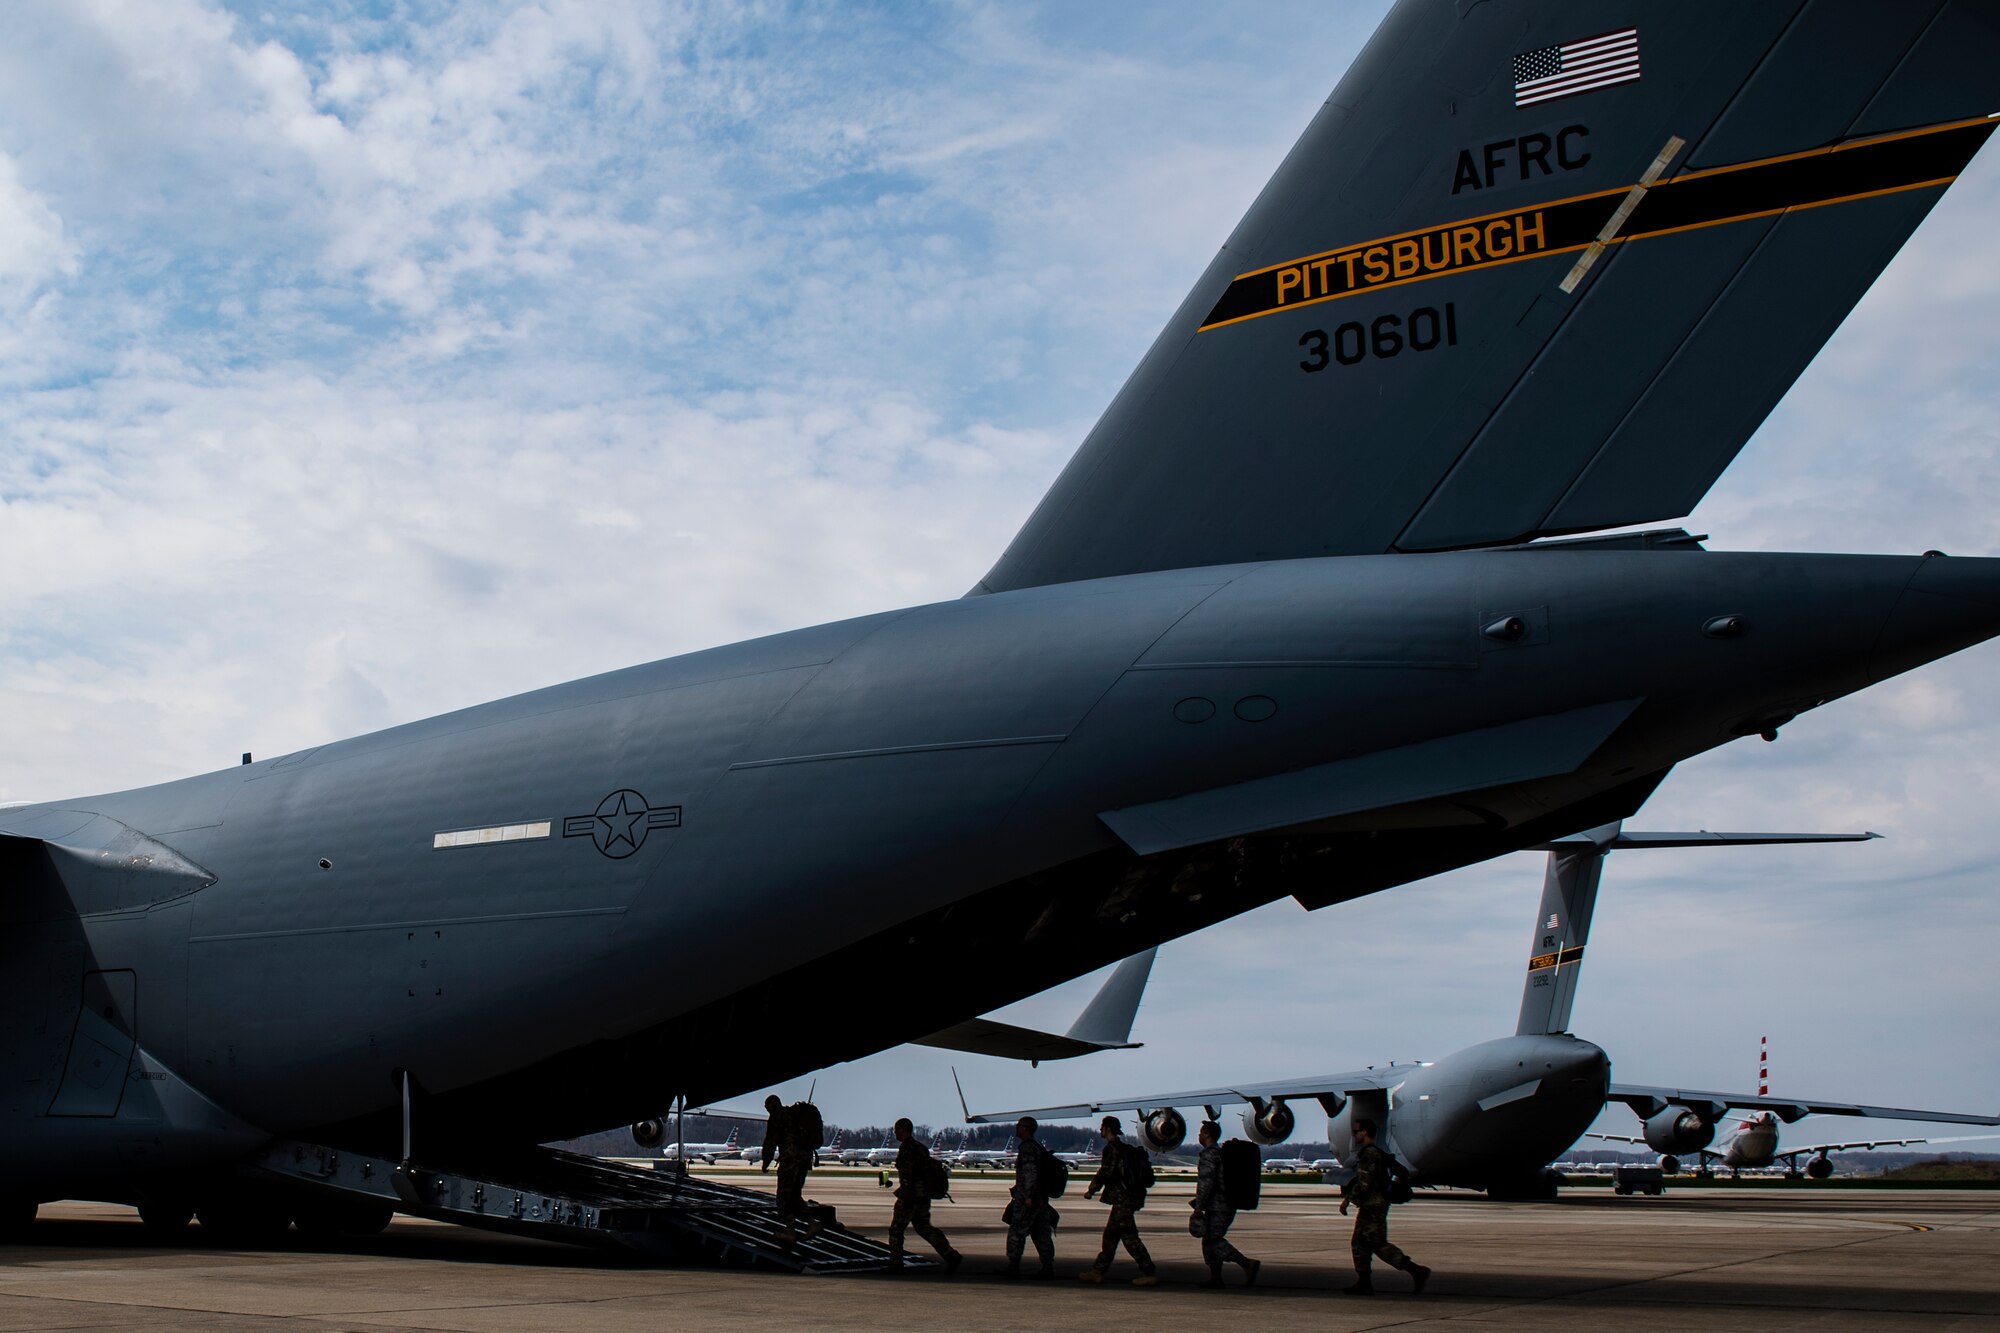 Airmen assigned to the 911th Airlift Wing who were mobilized to support the COVID-19 efforts board onto a C-17 Globemaster III aircraft at the Pittsburgh International Airport Air Reserve Station, Pennsylvania, April 5, 2020.